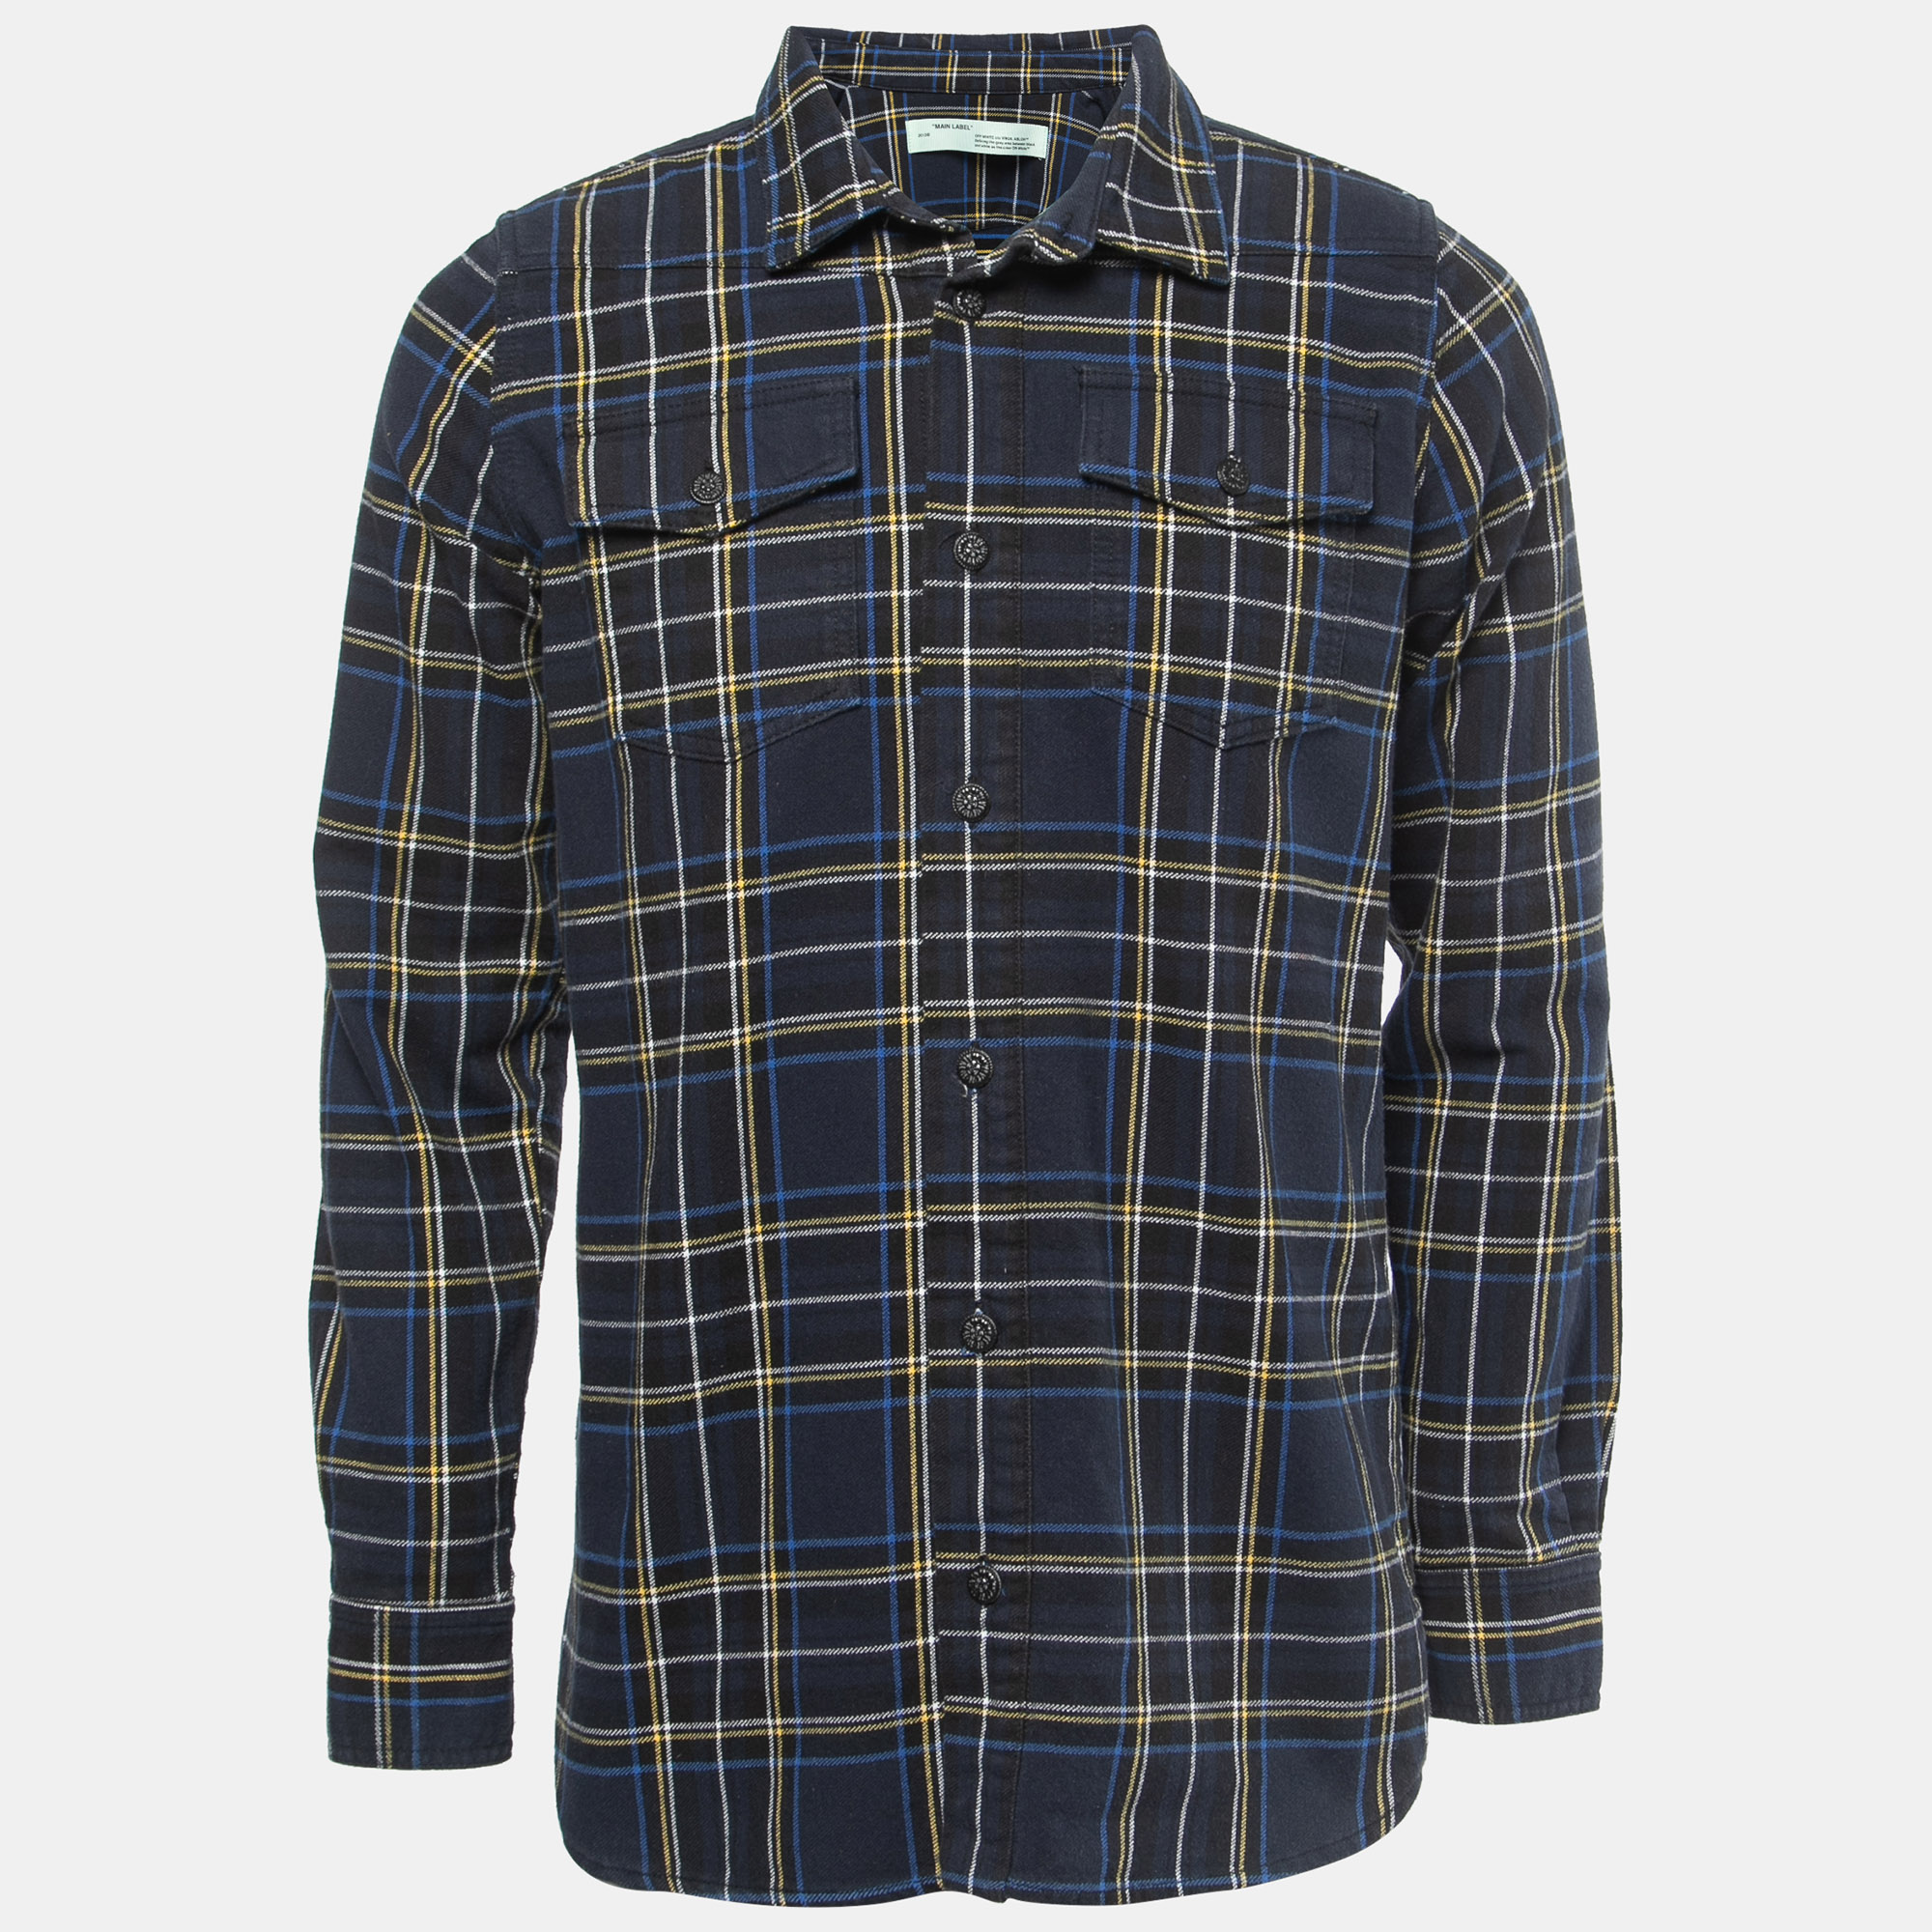 Off-White Navy Blue Checkered Cotton Button Front Shirt XS